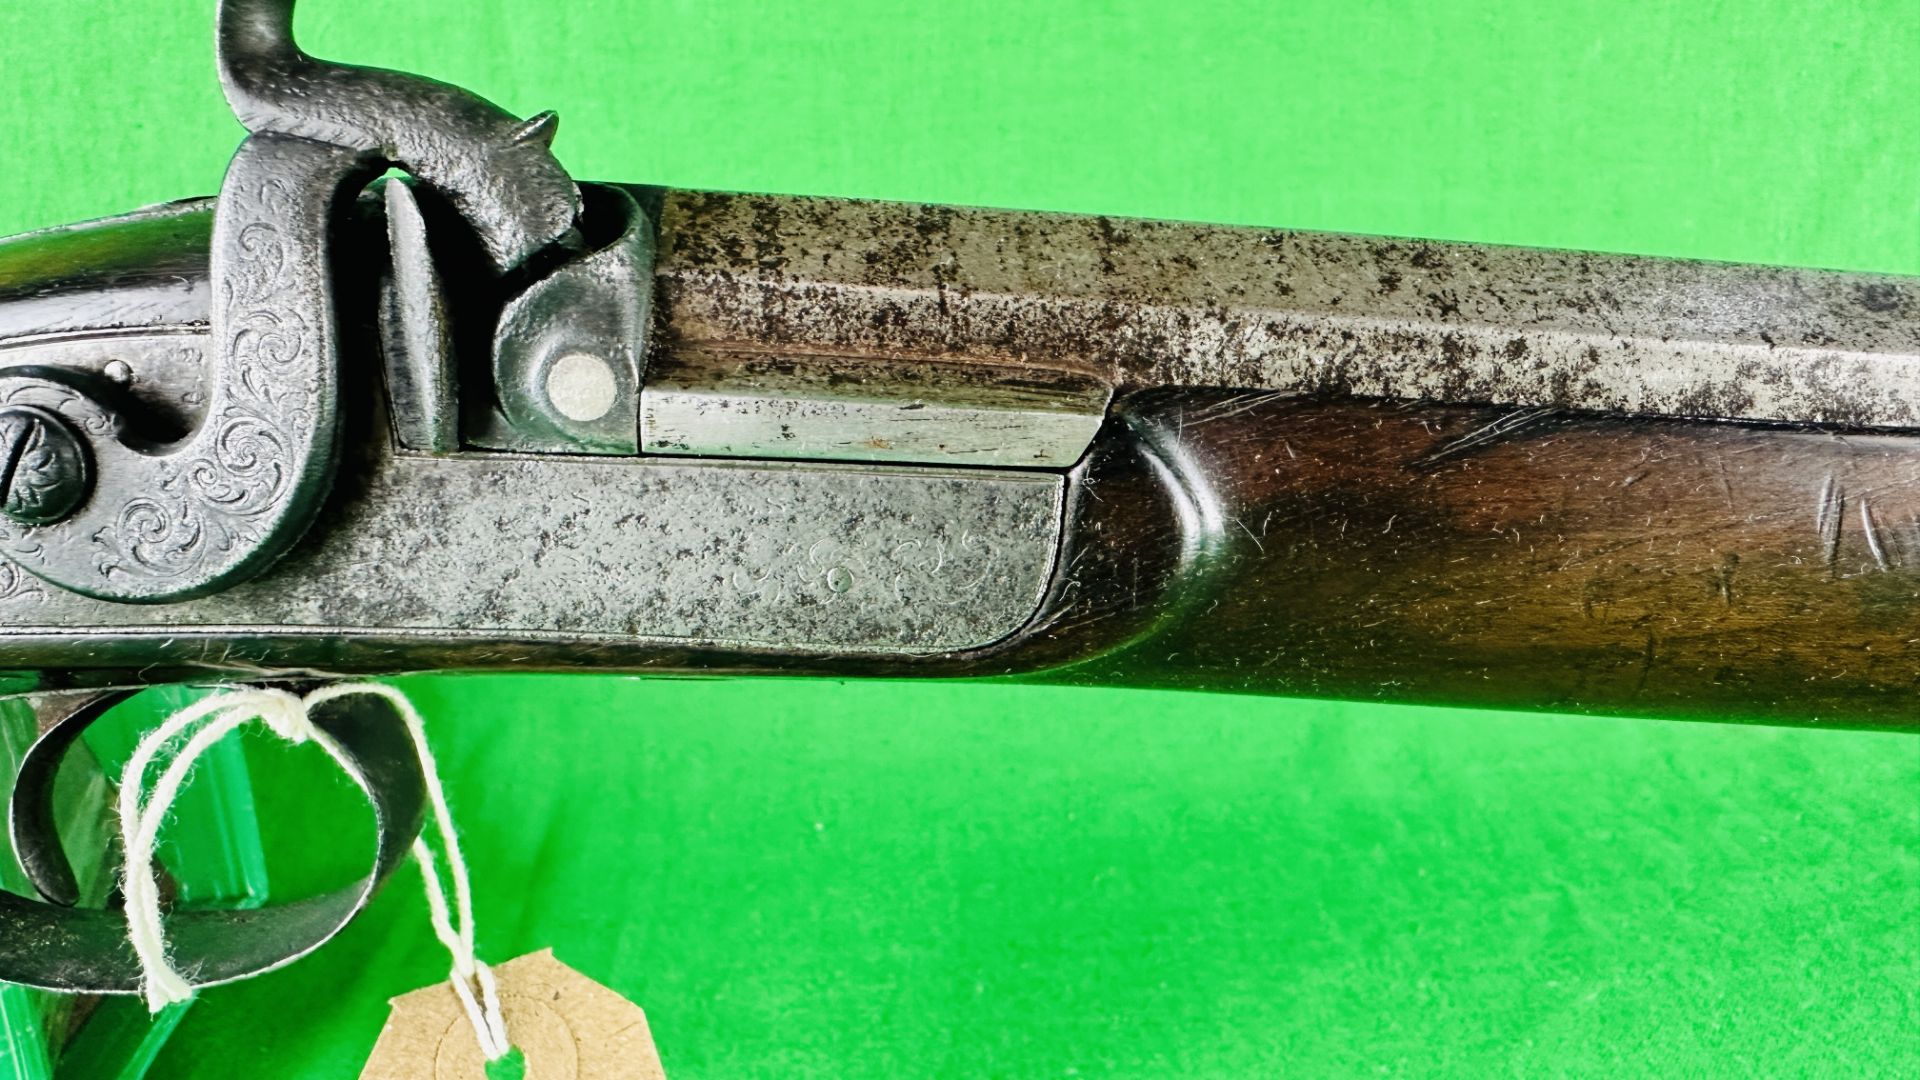 ANTIQUE PERCUSSION CAP MUZZLE LOADING RIFLE WITH LOADING ROD, - Image 7 of 21